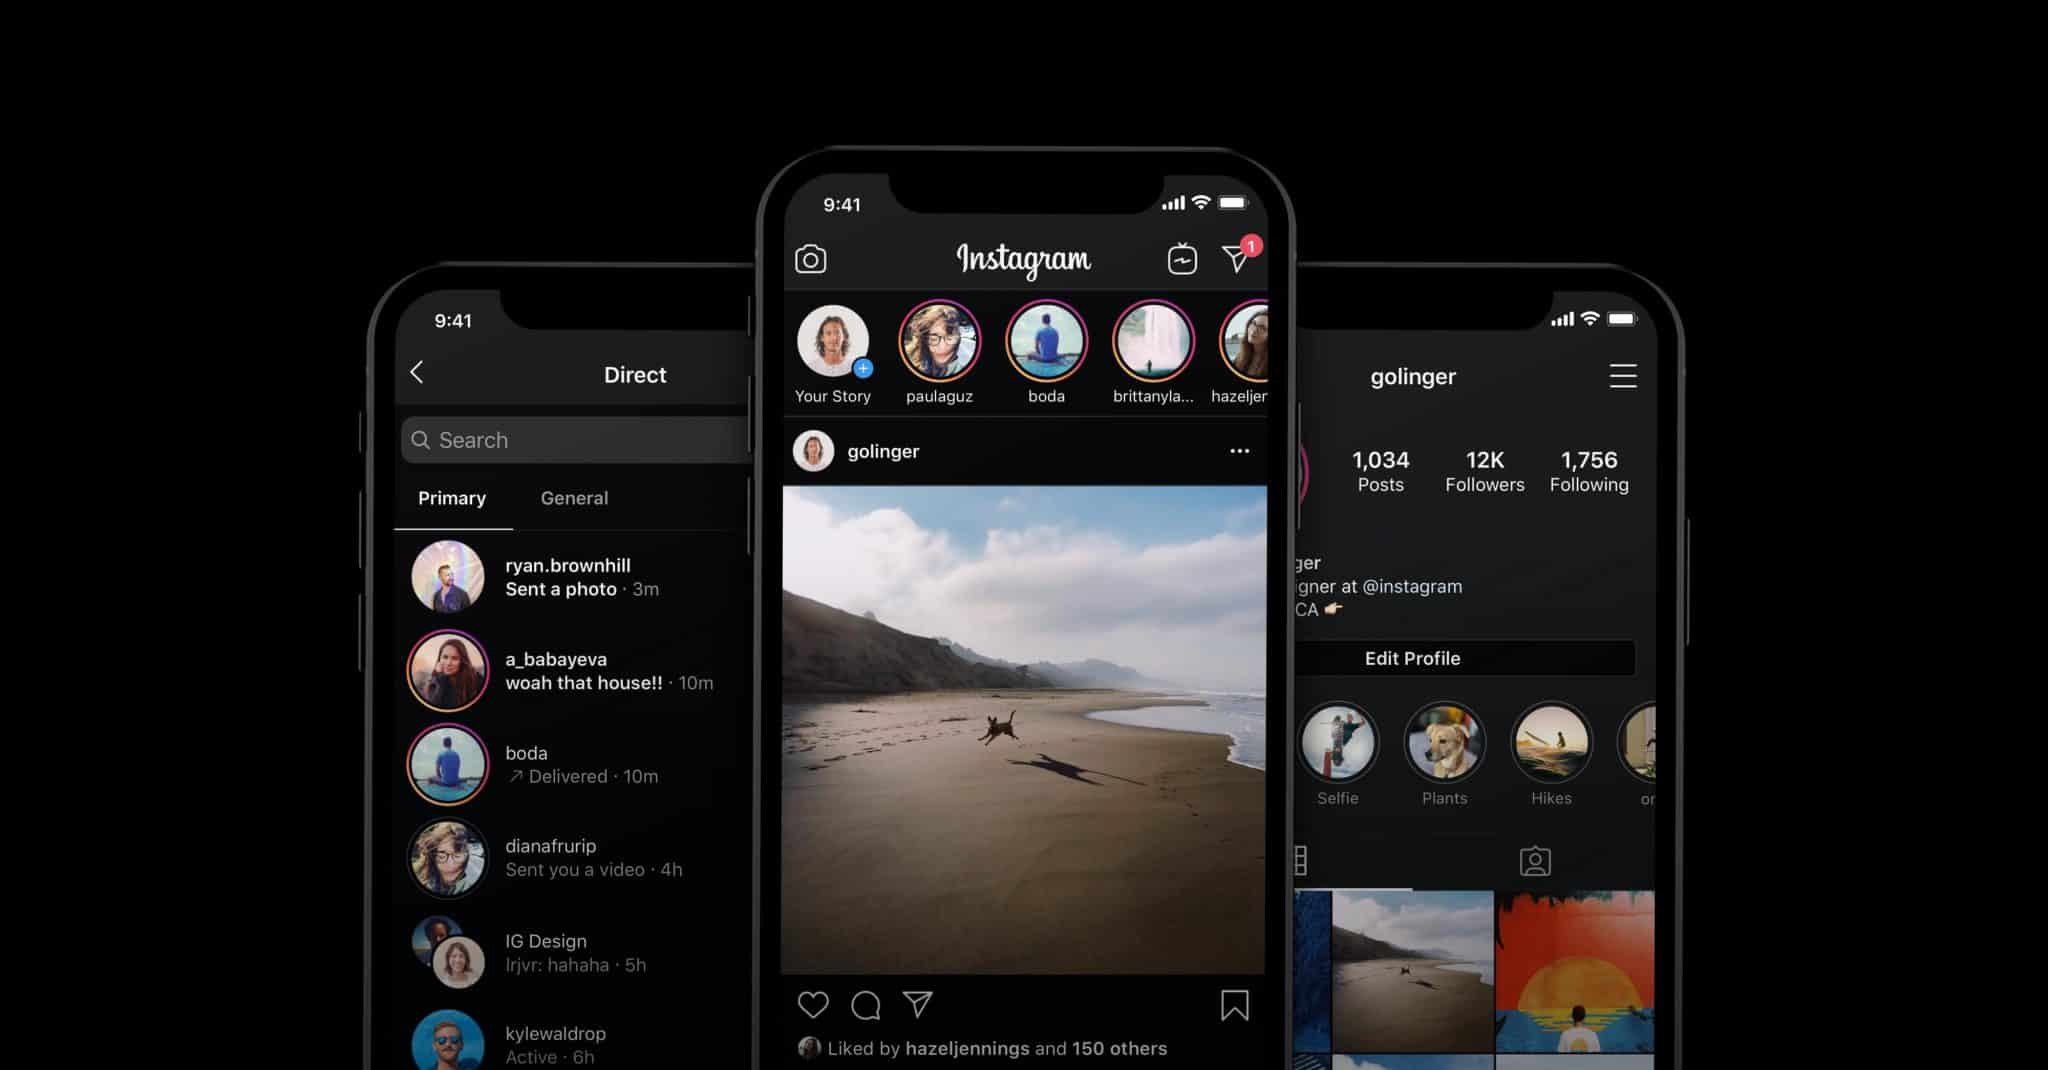 Instagram Dark Mode is here for both Android and iOS